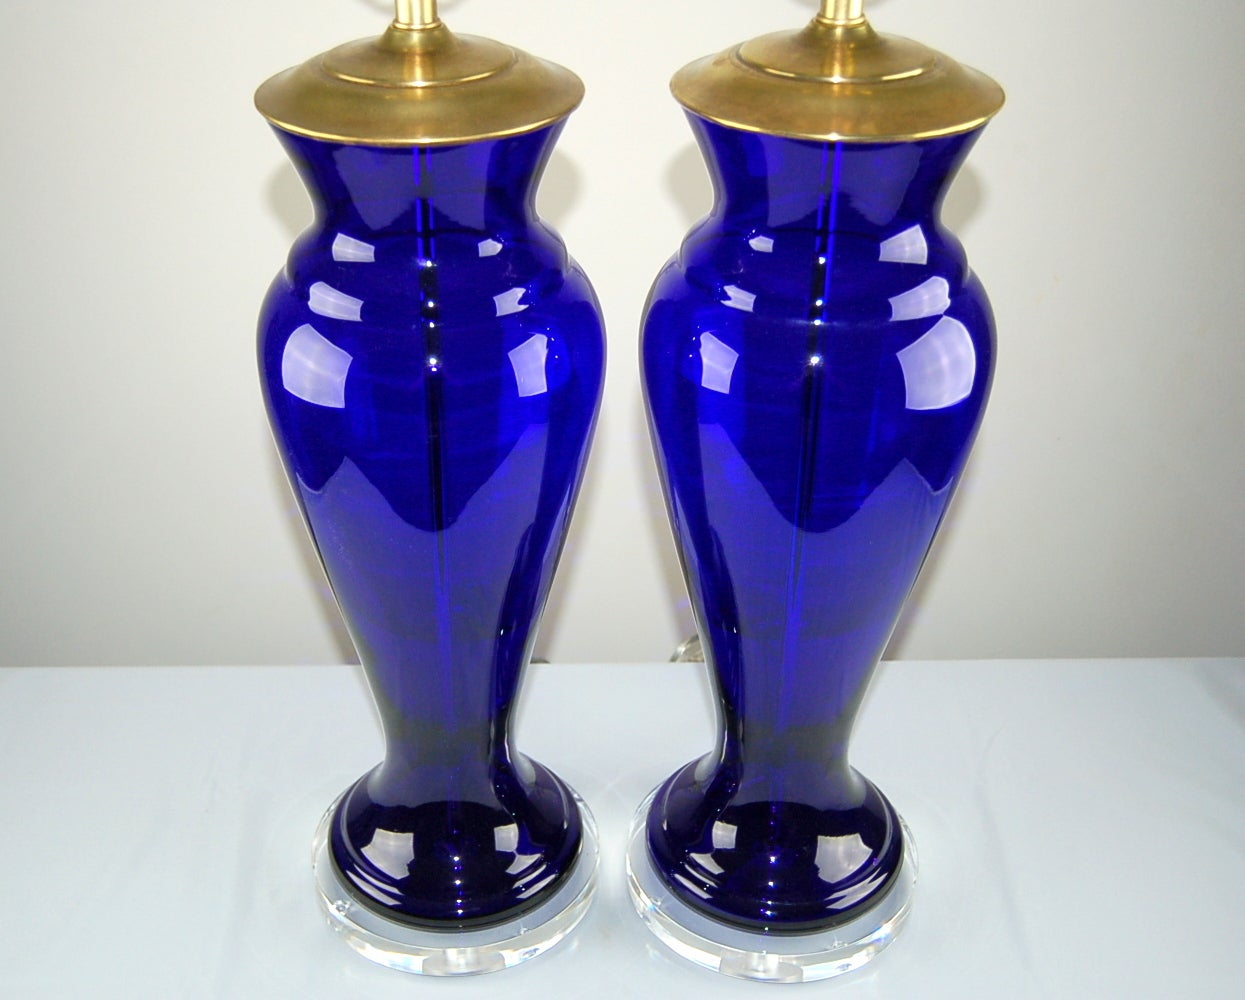 Brass Pair of Vintage Murano Lamps in Cobalt Blue